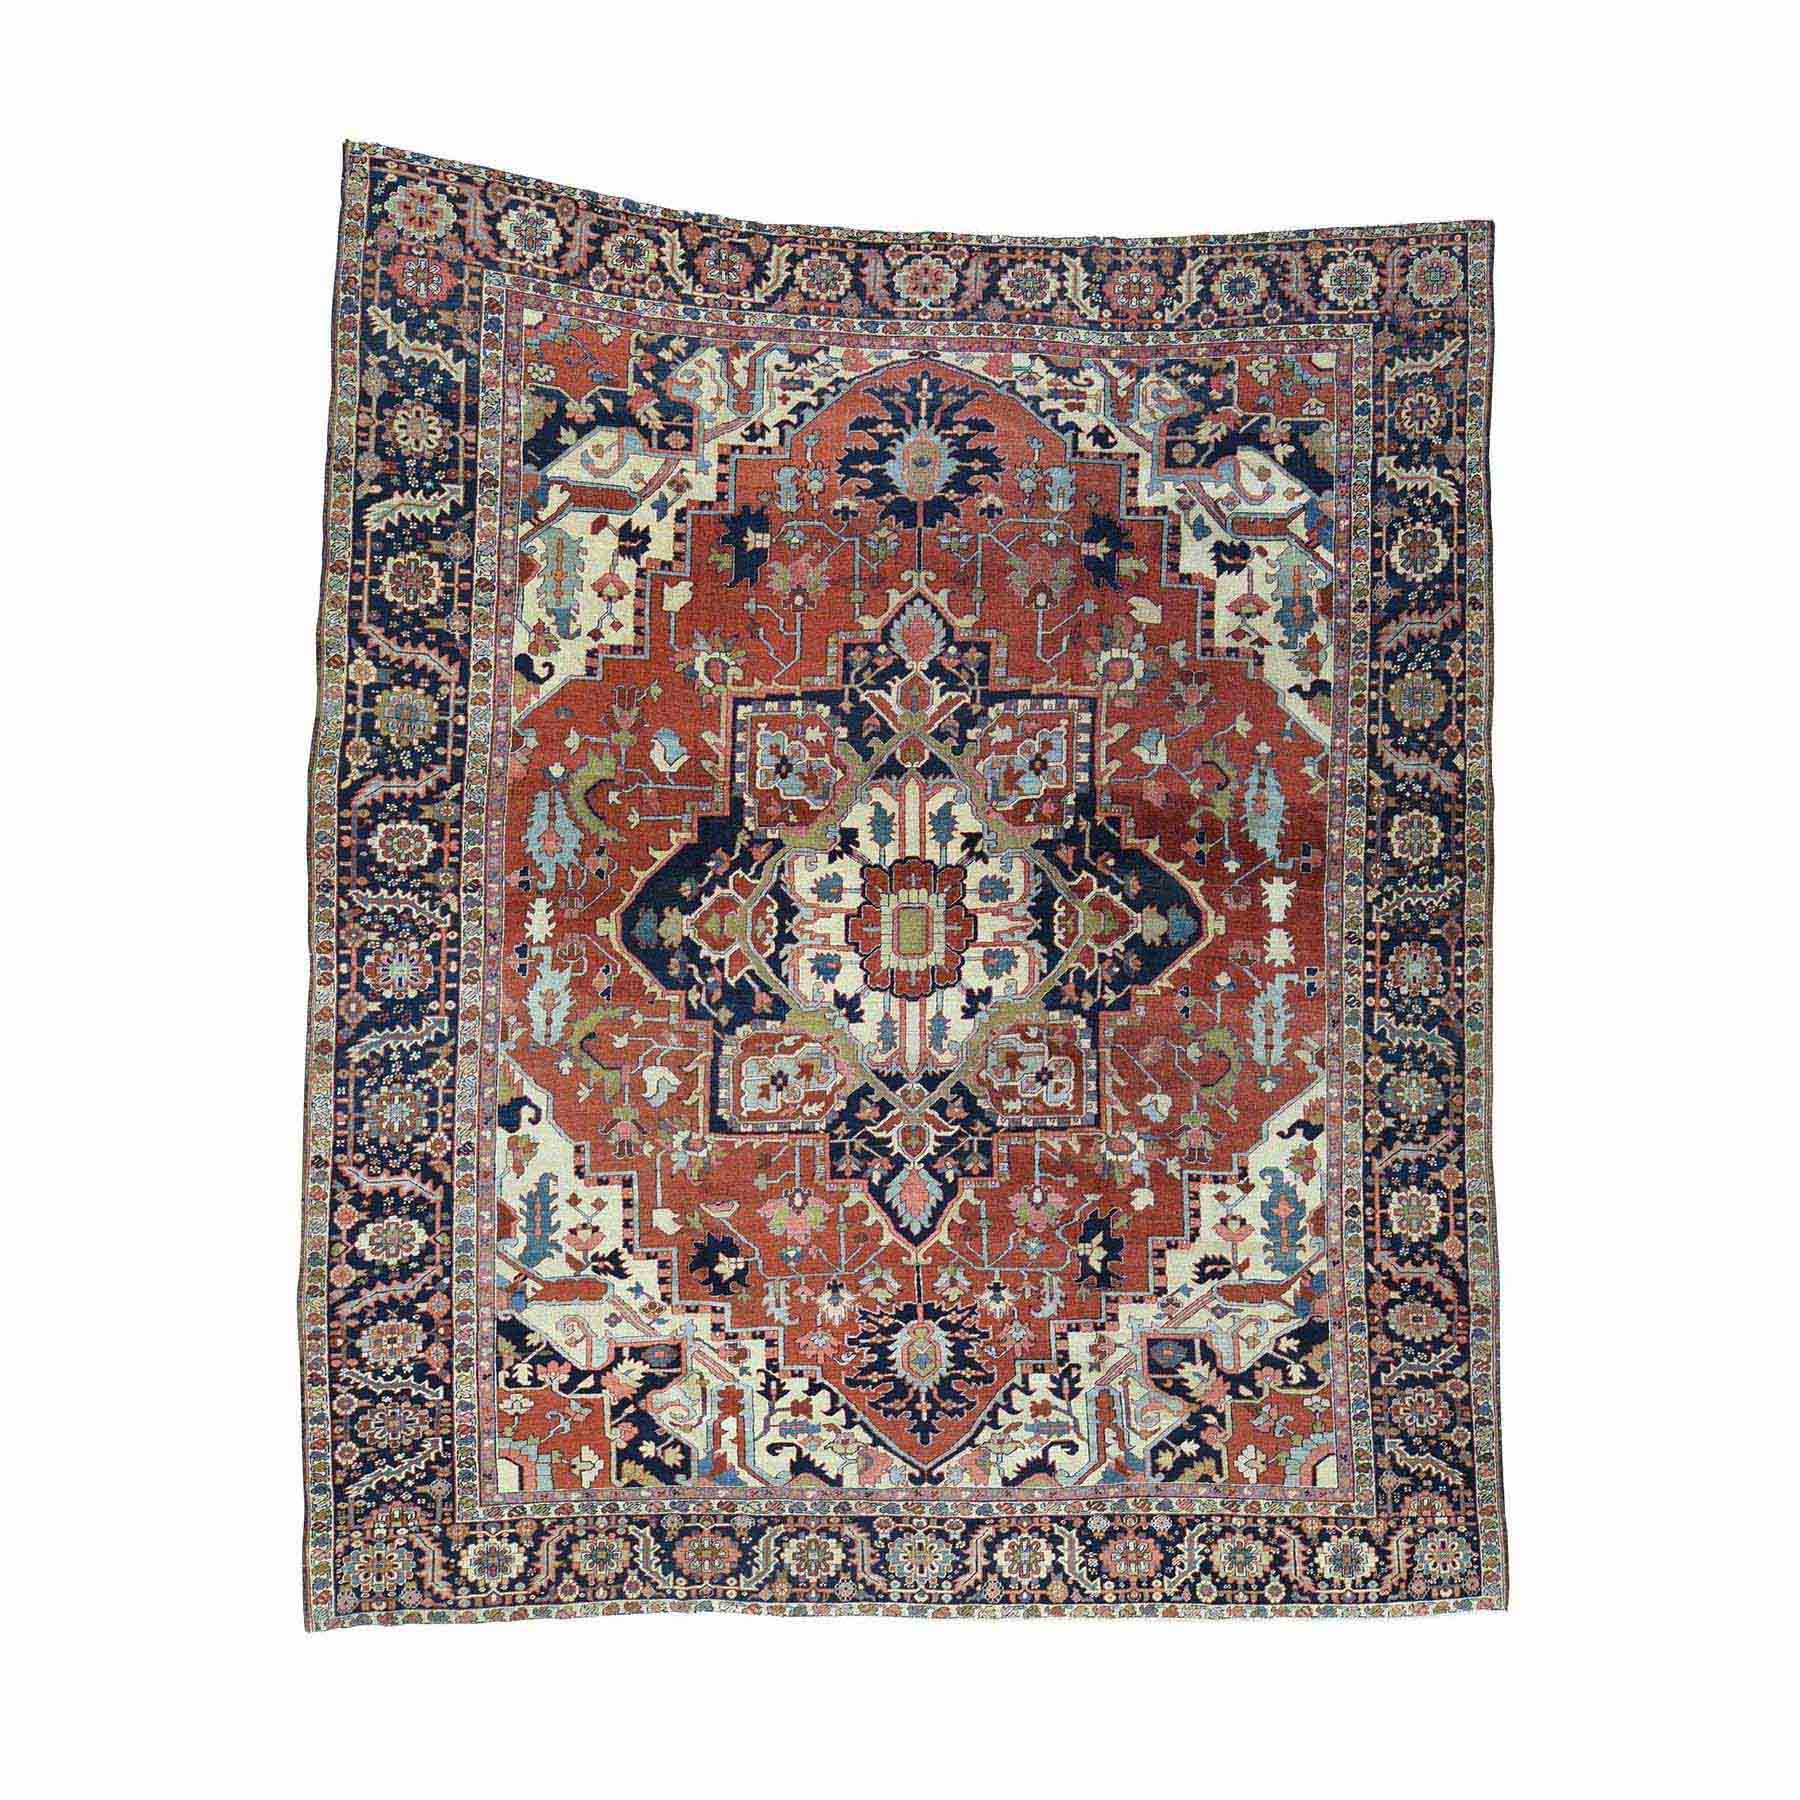 Antique-Hand-Knotted-Rug-173925